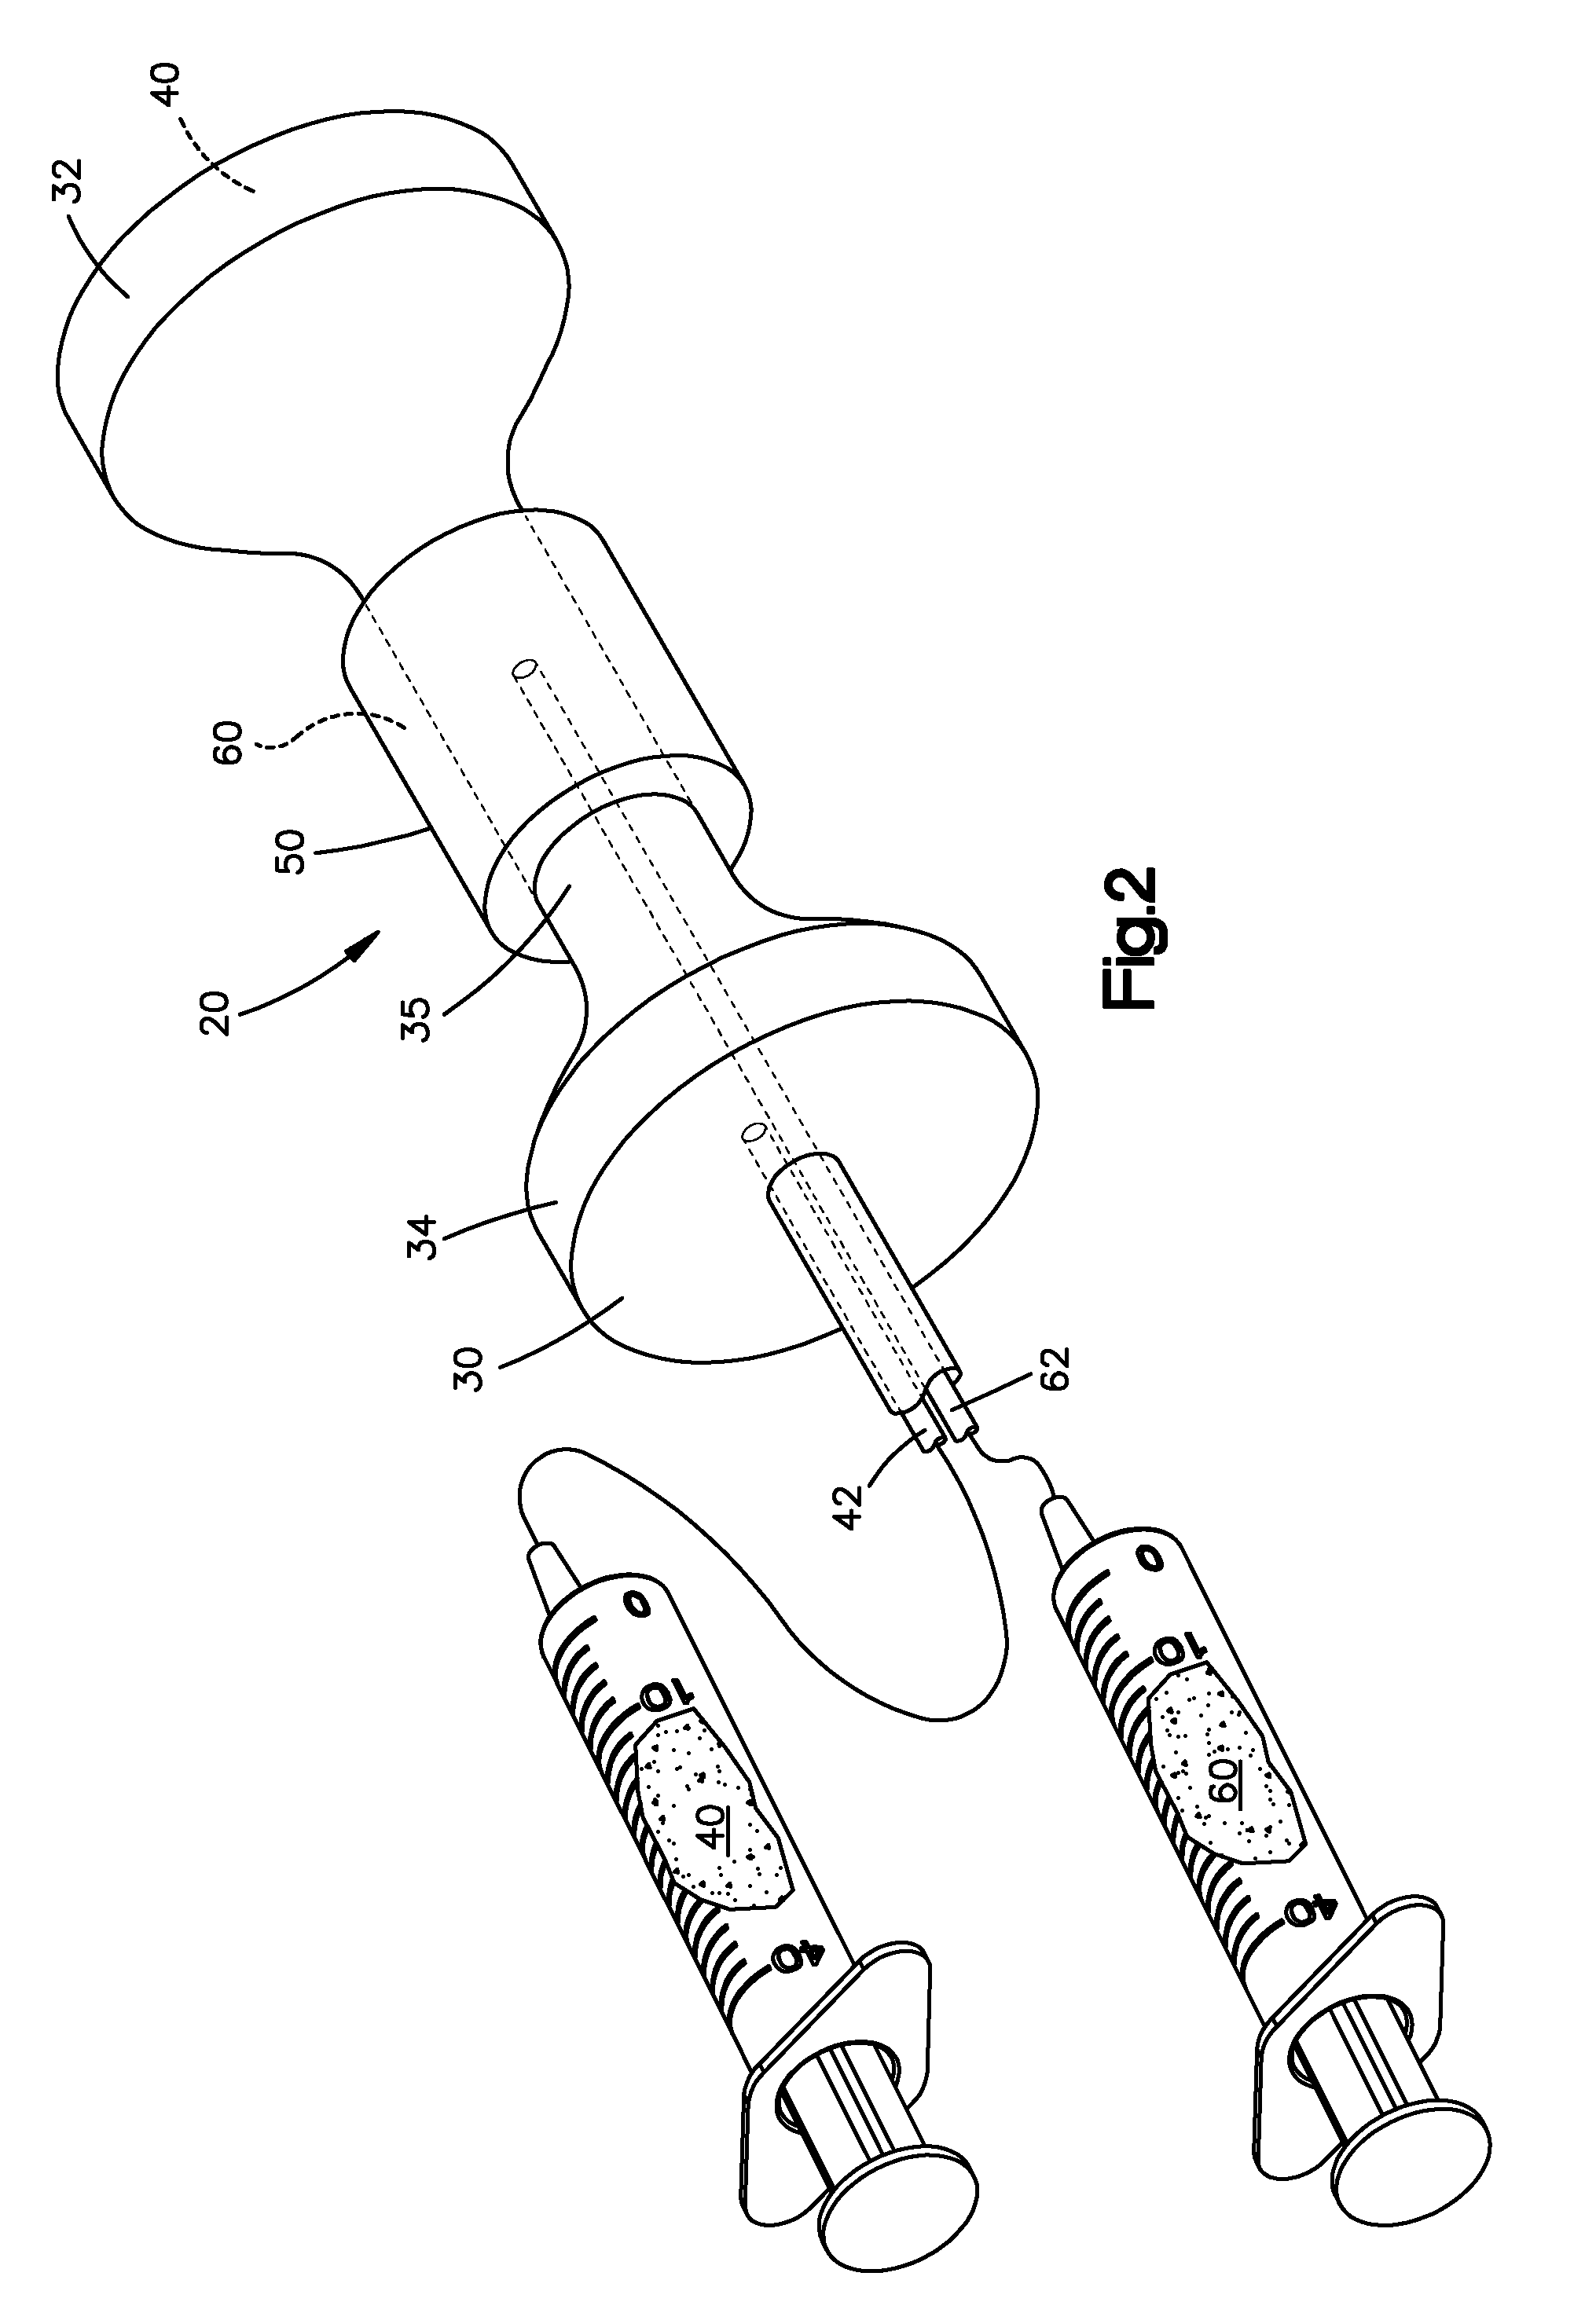 Inflatable interspinous spacer